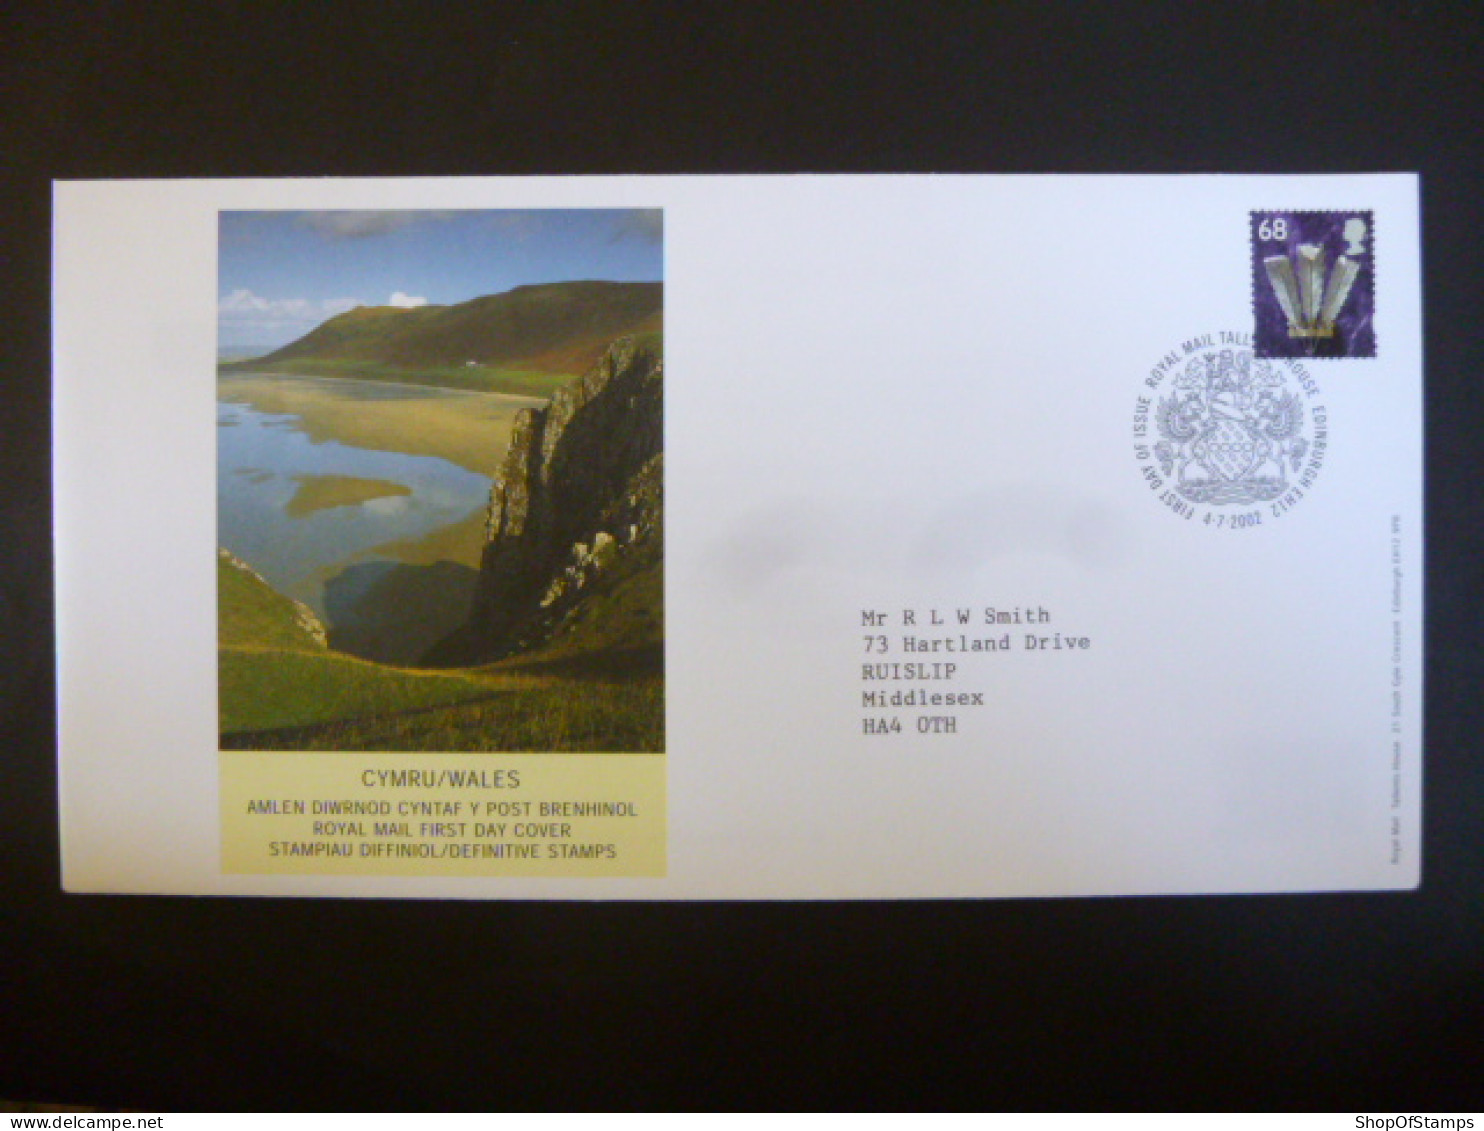 GREAT BRITAIN SG W88 FDC ROYAL MAIL TALENT HOUSE EDINBURGH - Unclassified